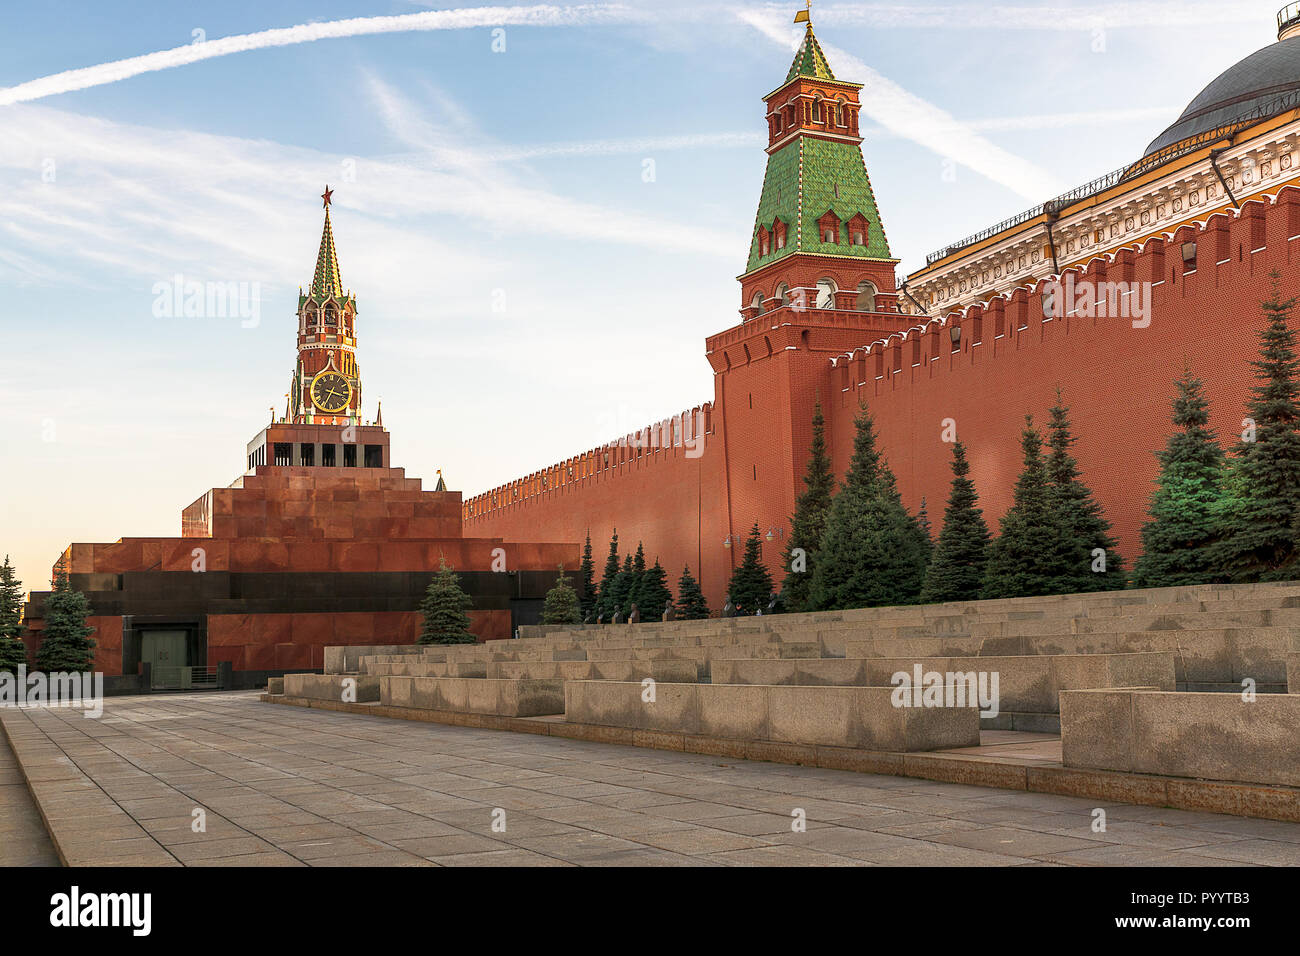 The Red Square and the Kremlin are the world famous historical objects of Moscow, Russia, and the official residence of the President of Russia. Stock Photo